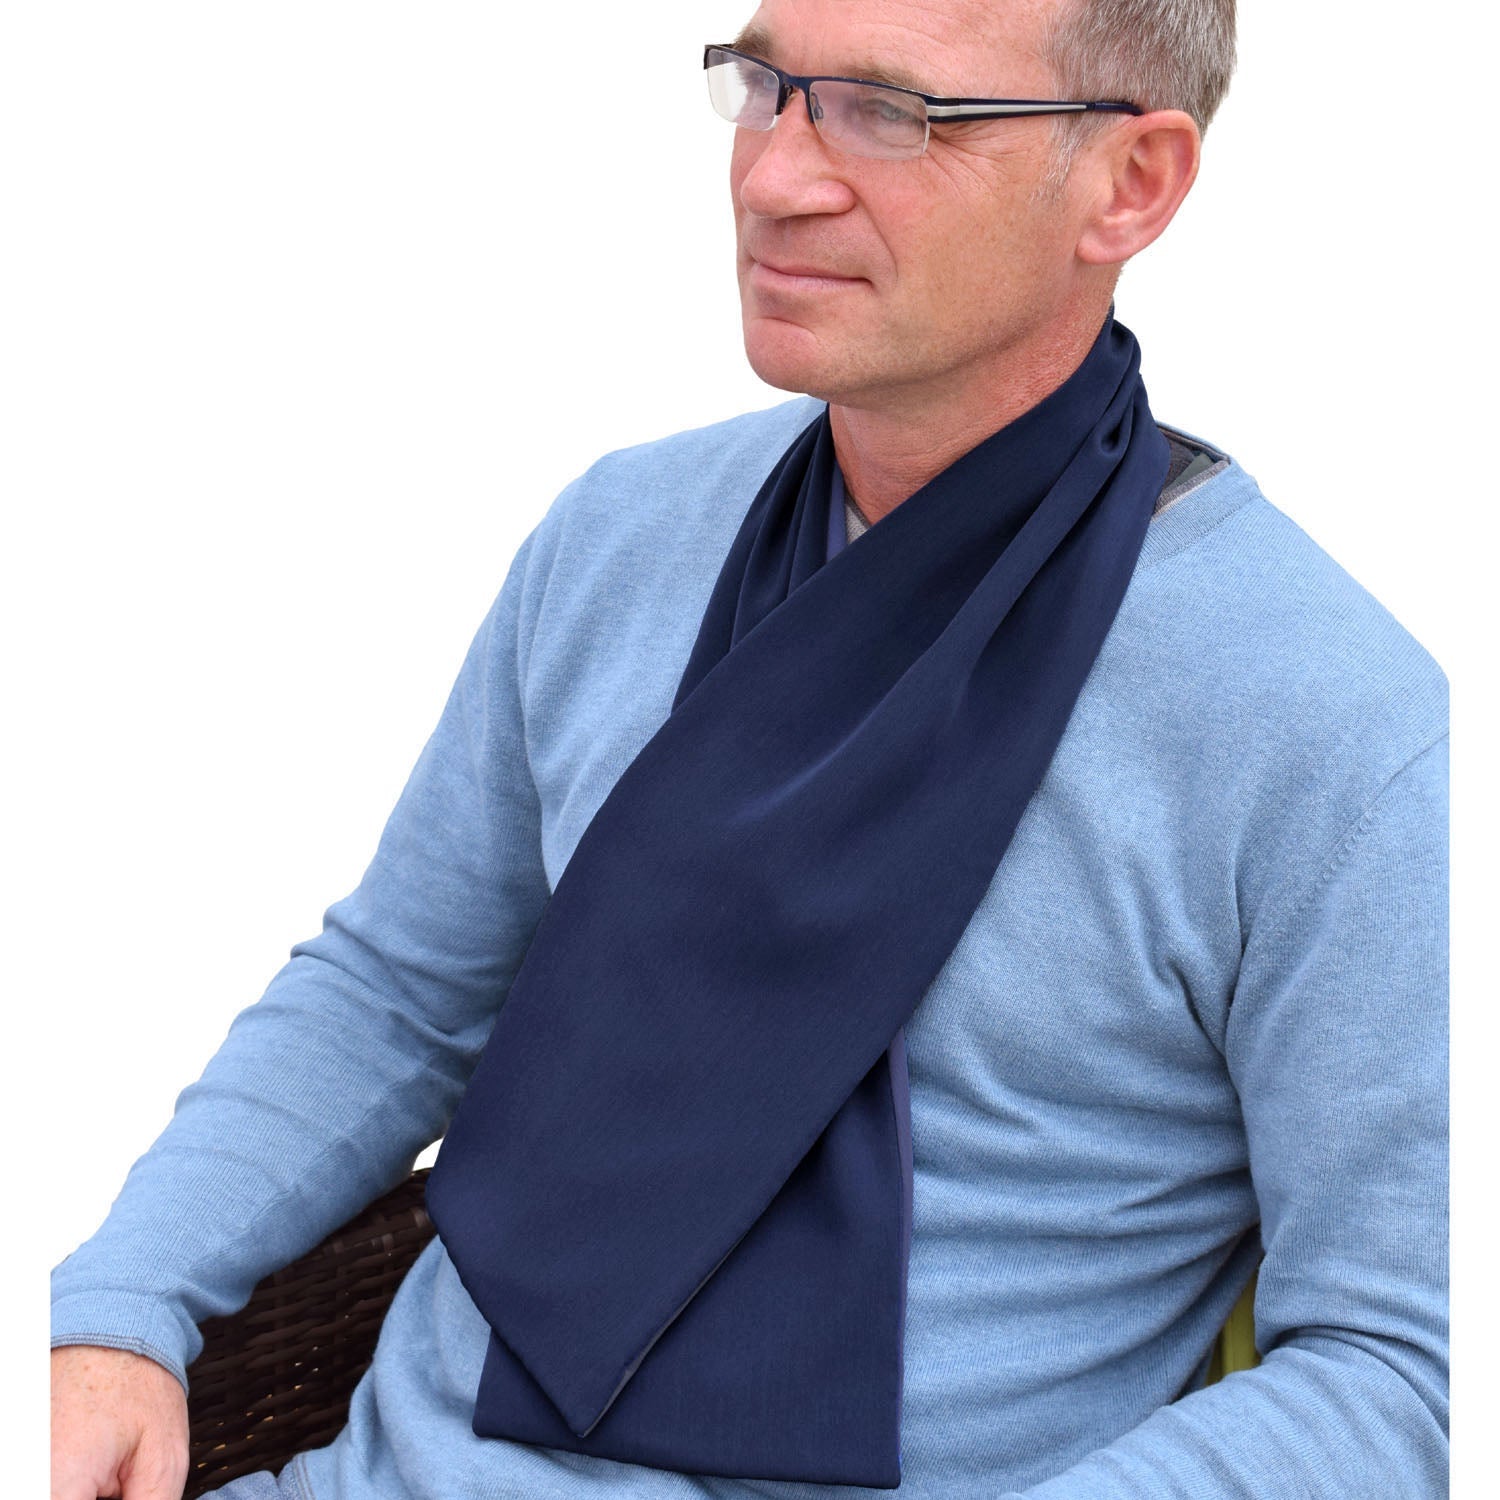 Cross Scarf Clothing Protector - Navy Blue (UK VAT Exempt) | Health Care | Care Designs